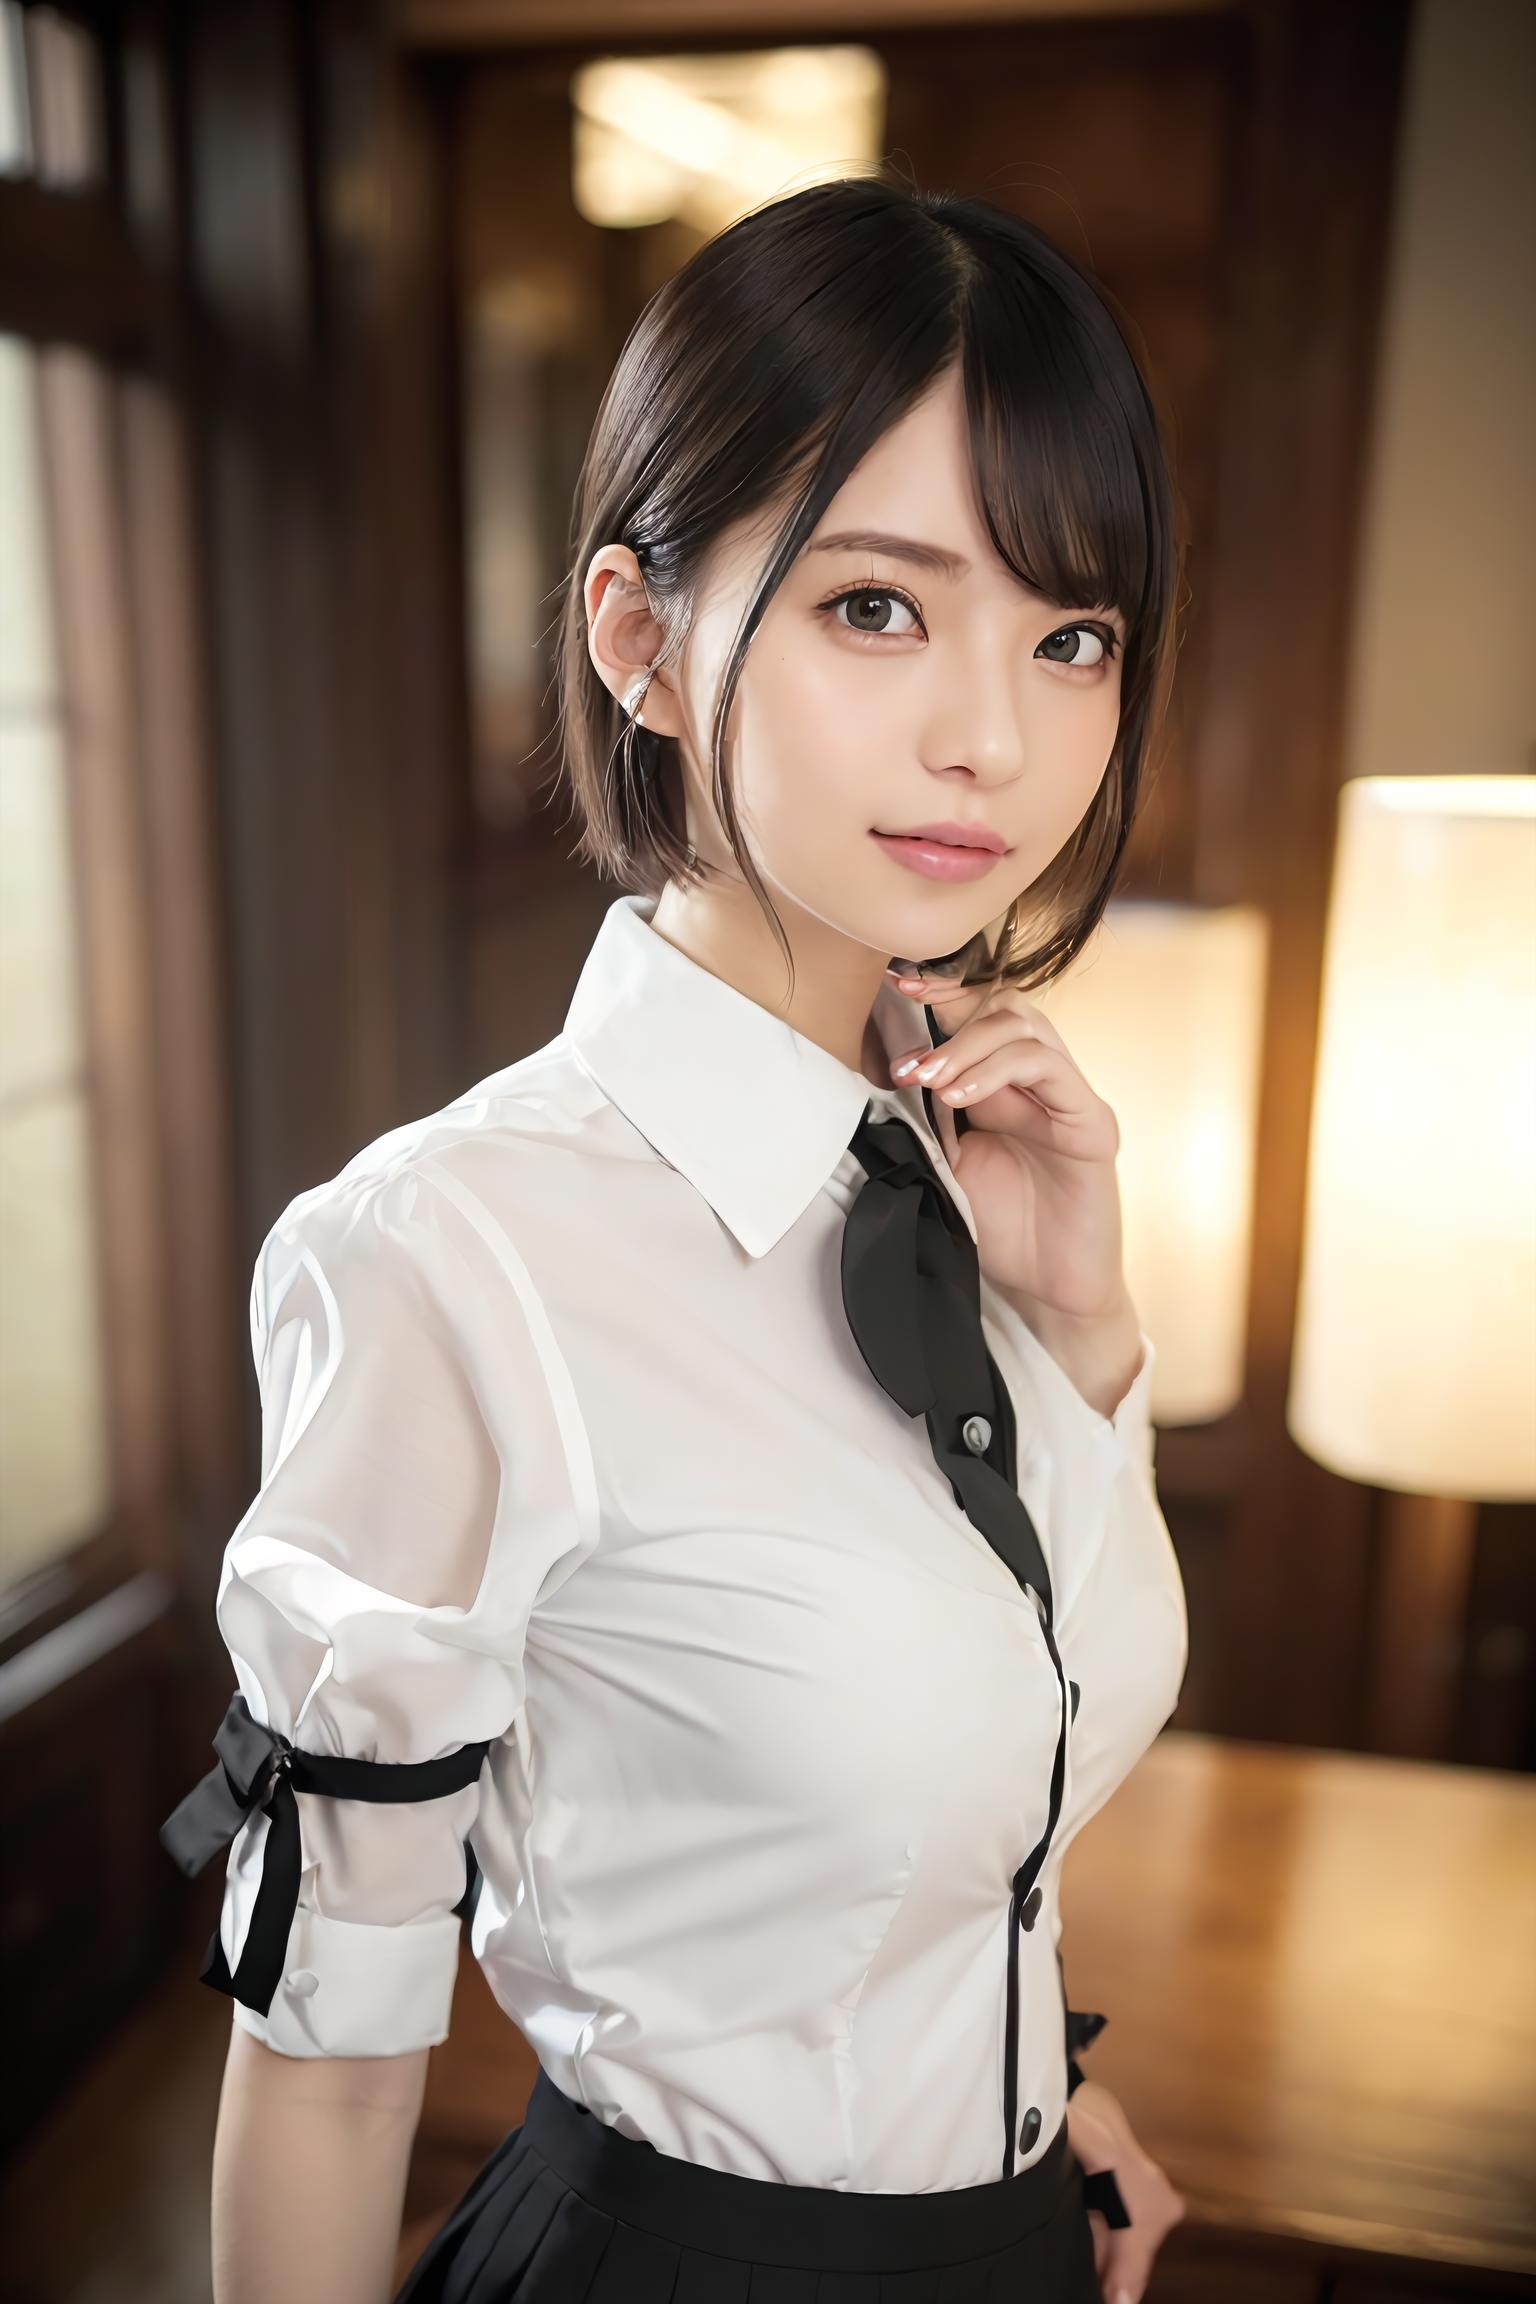 A young woman in a white blouse and black tie posing for the camera.